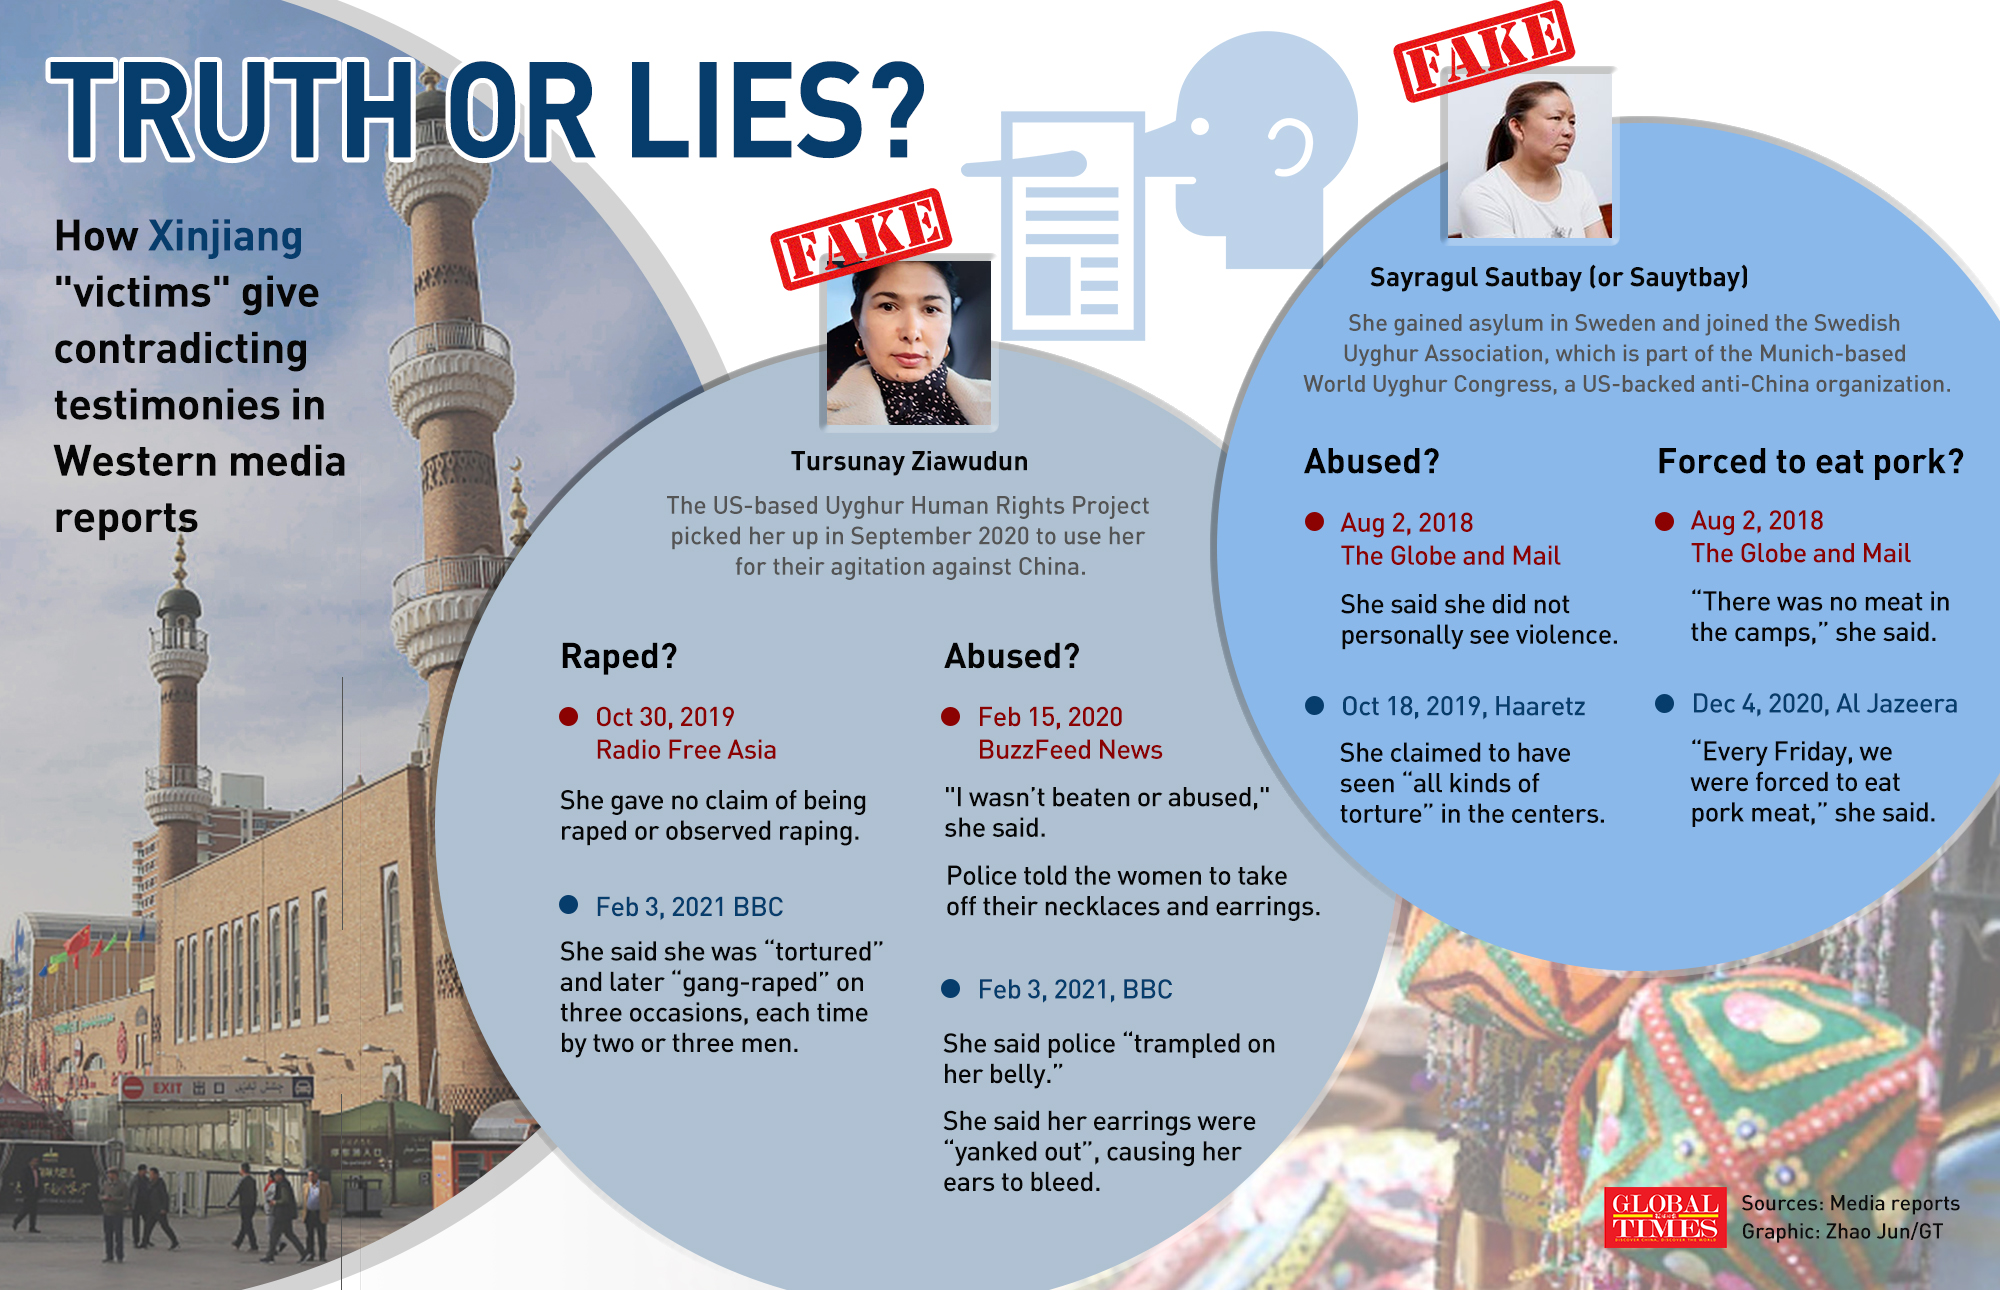 Truth or lies? How Xinjiang victims give contradicting testimonies in Western media reports. Graphic: GT